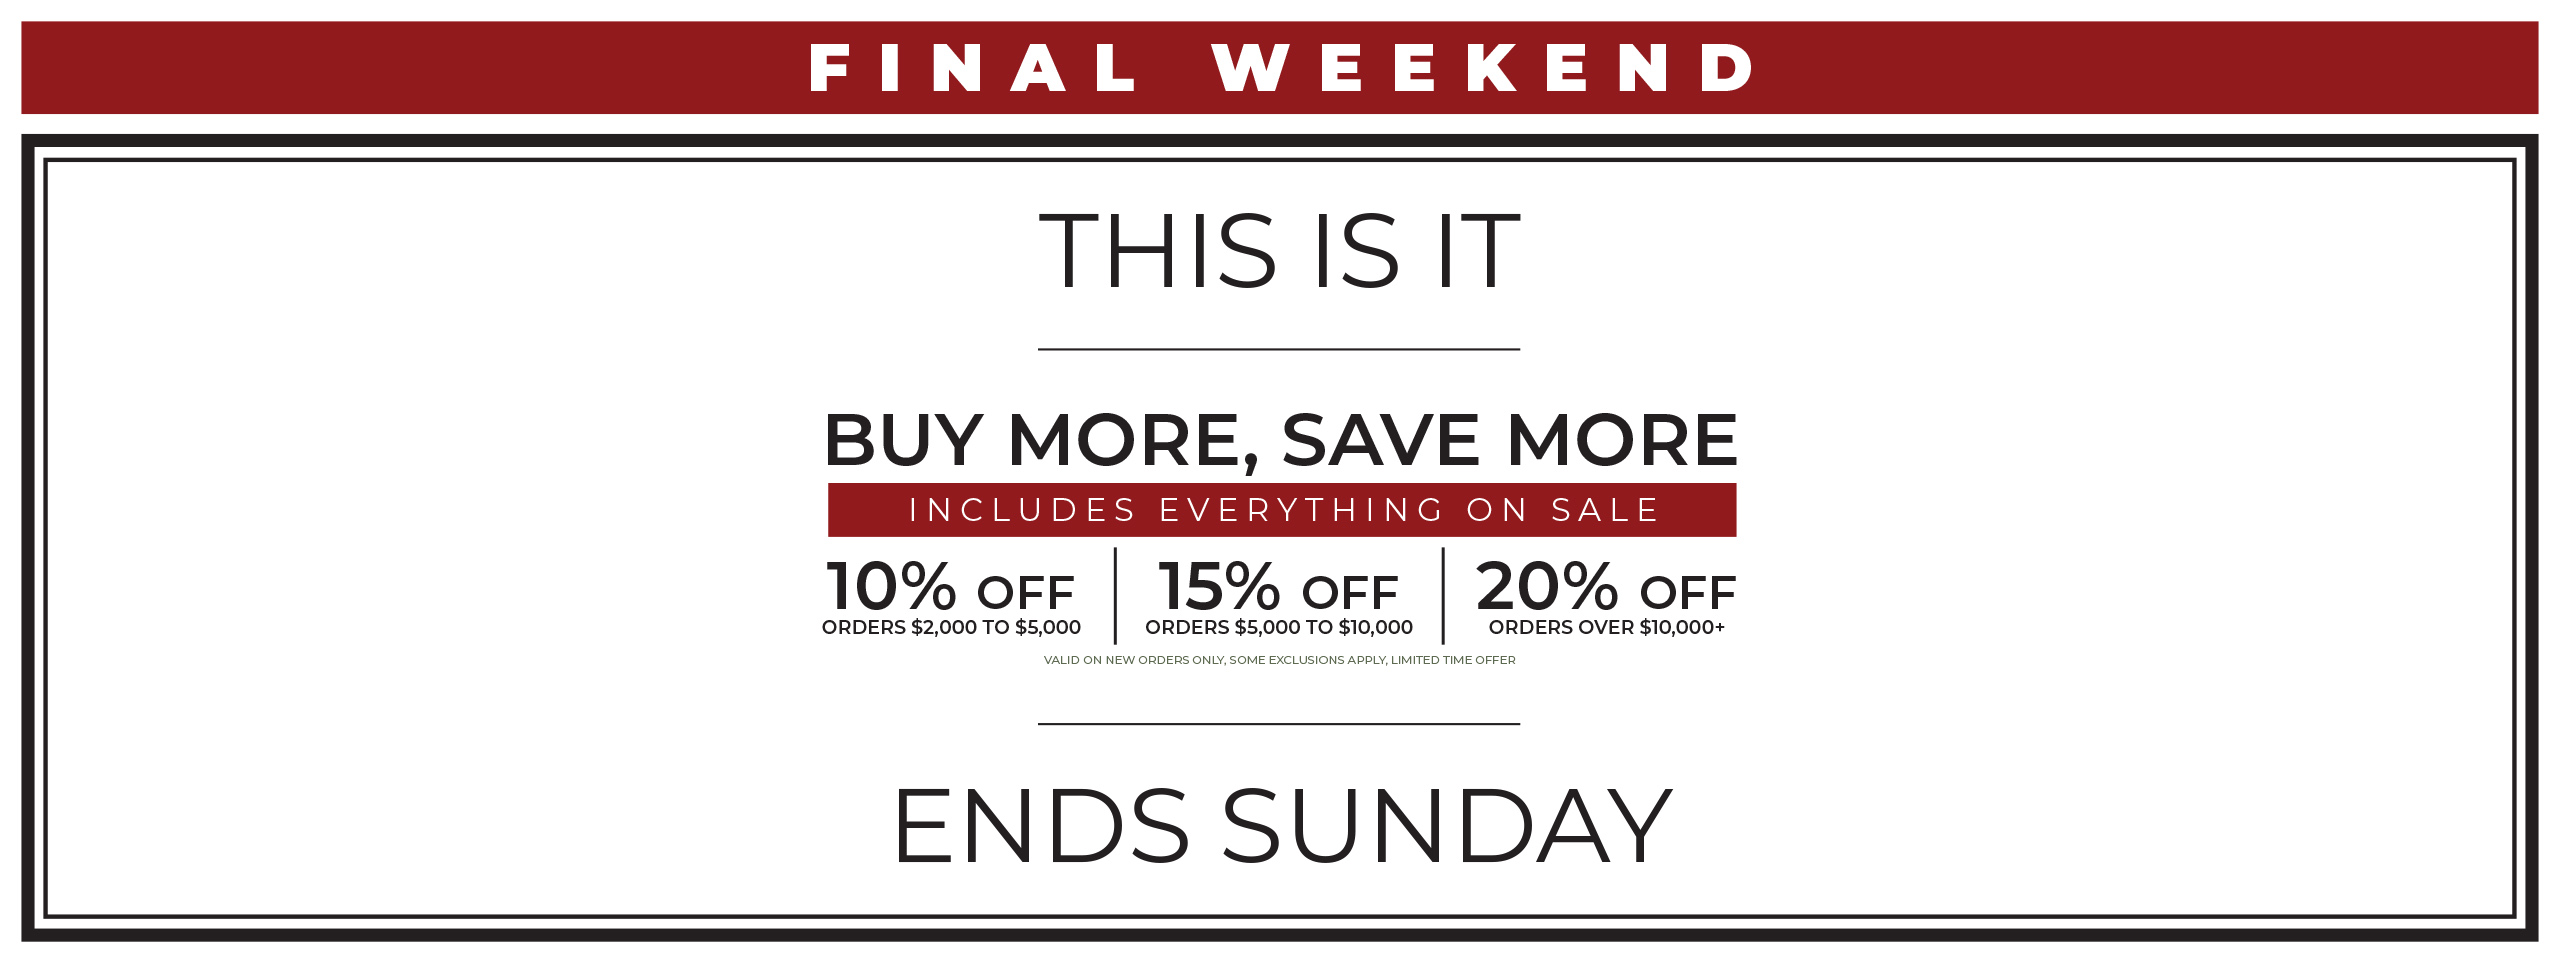 BUY MORE, SAVE MORE ENDS SUNDAY 5pm